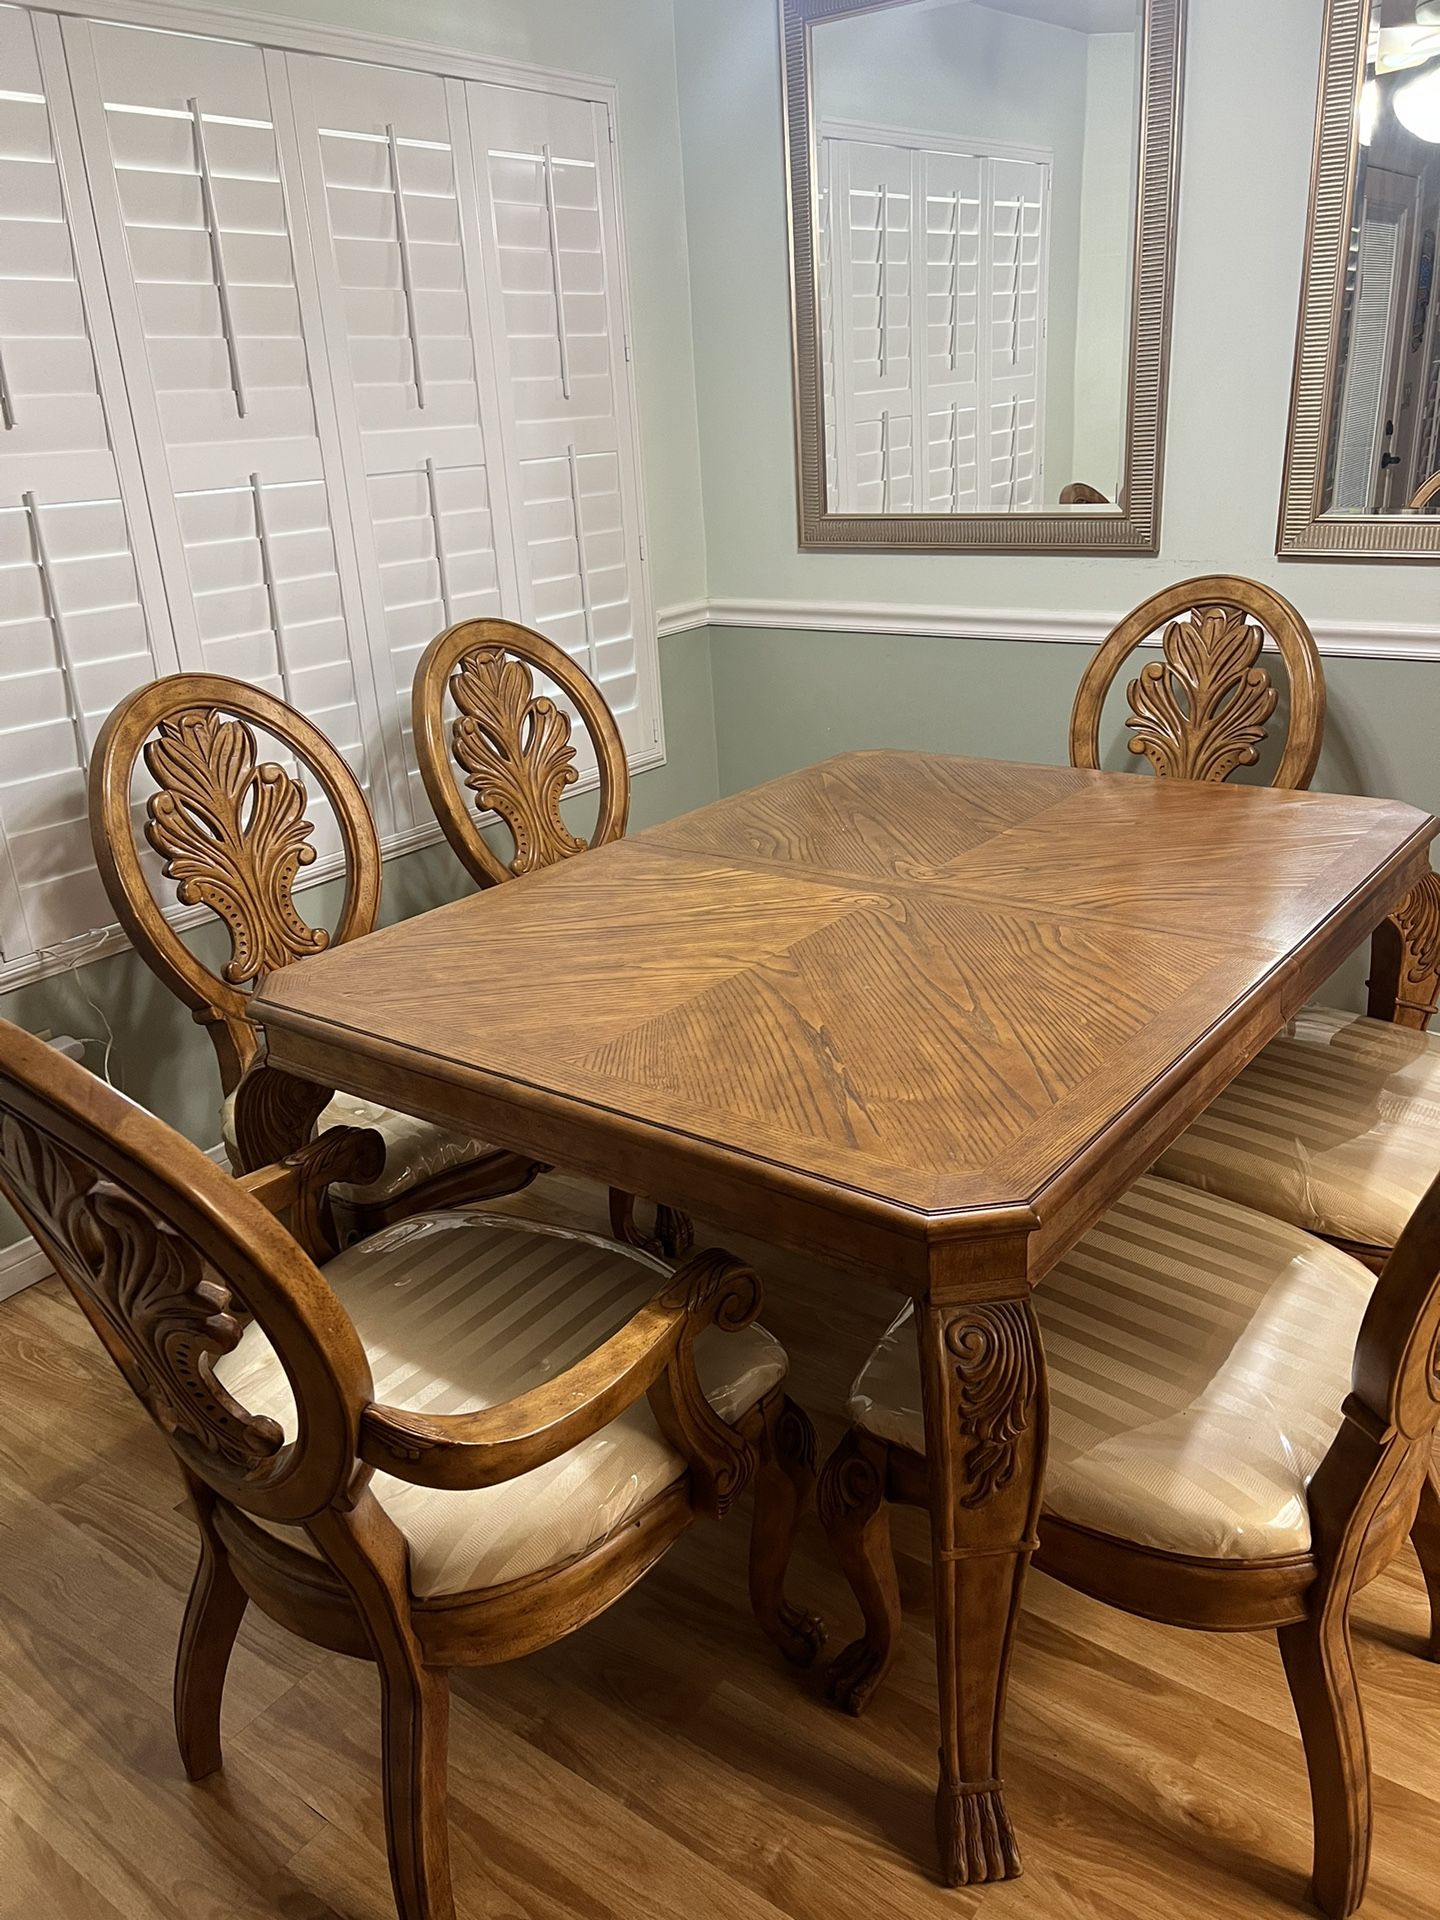 Dining room set, medium oak color, six chairs and center leaf